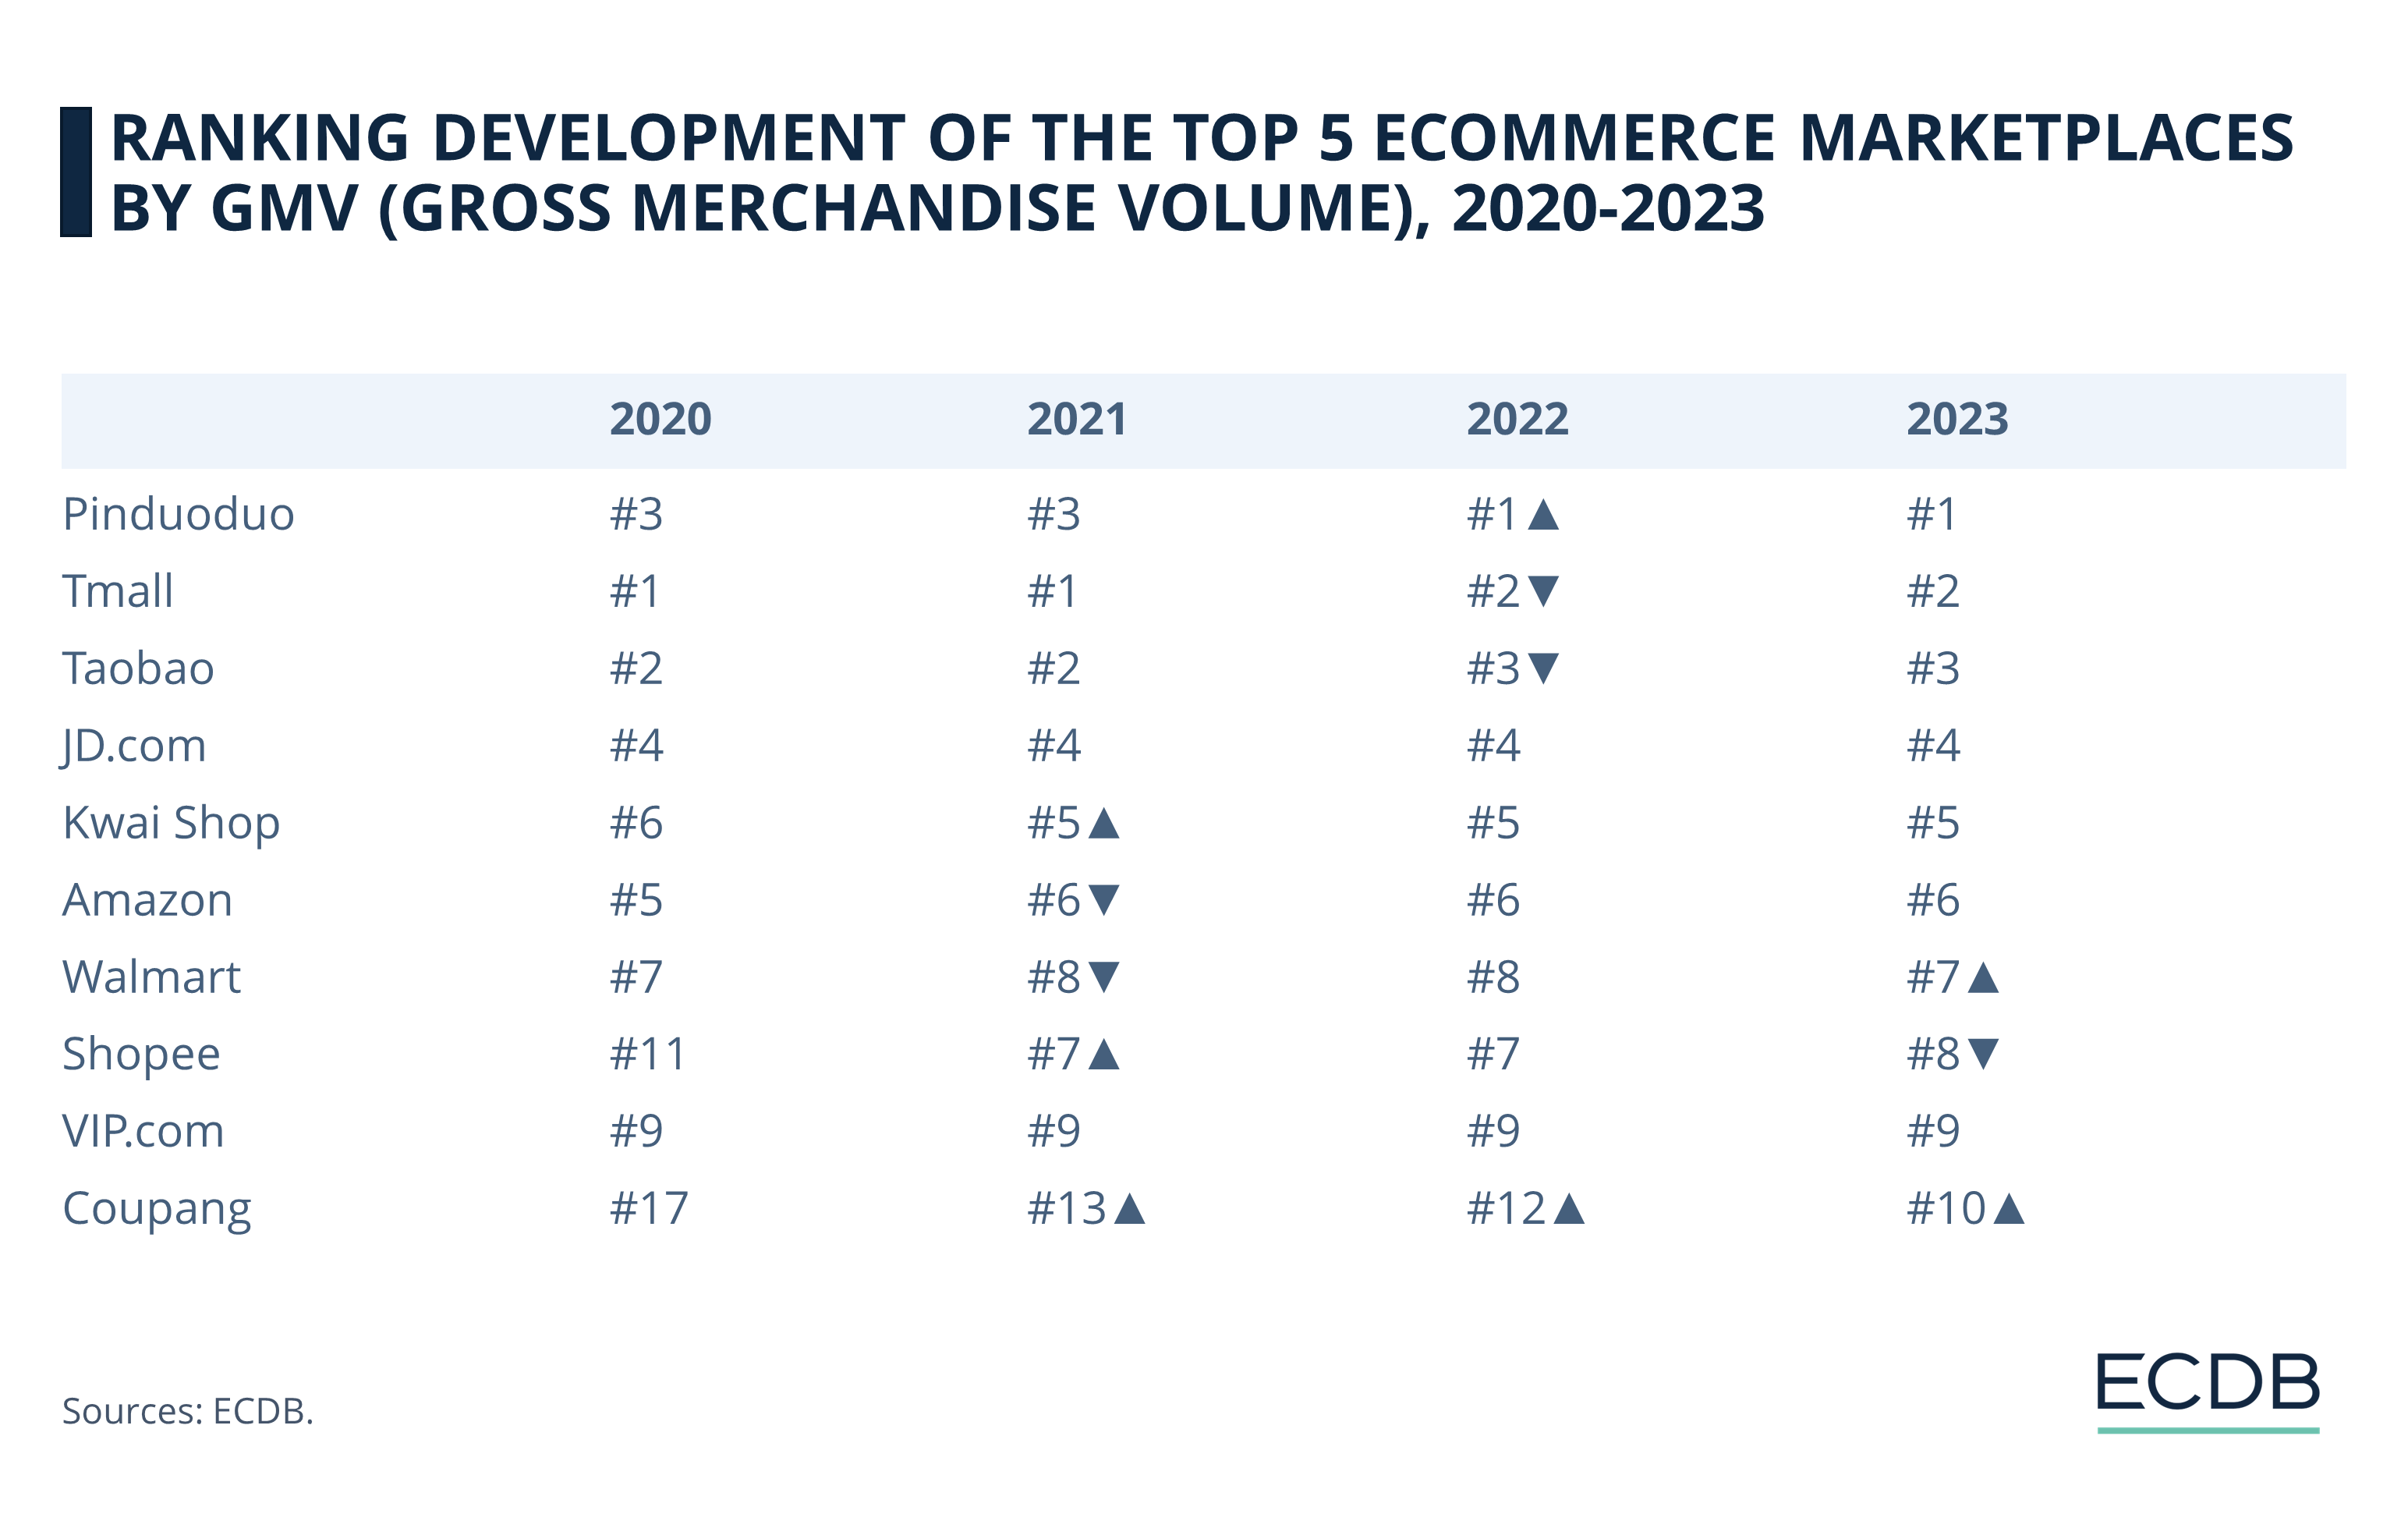 Ranking Development of the Top 5 eCommerce Marketplaces by GMV, 2020-2023